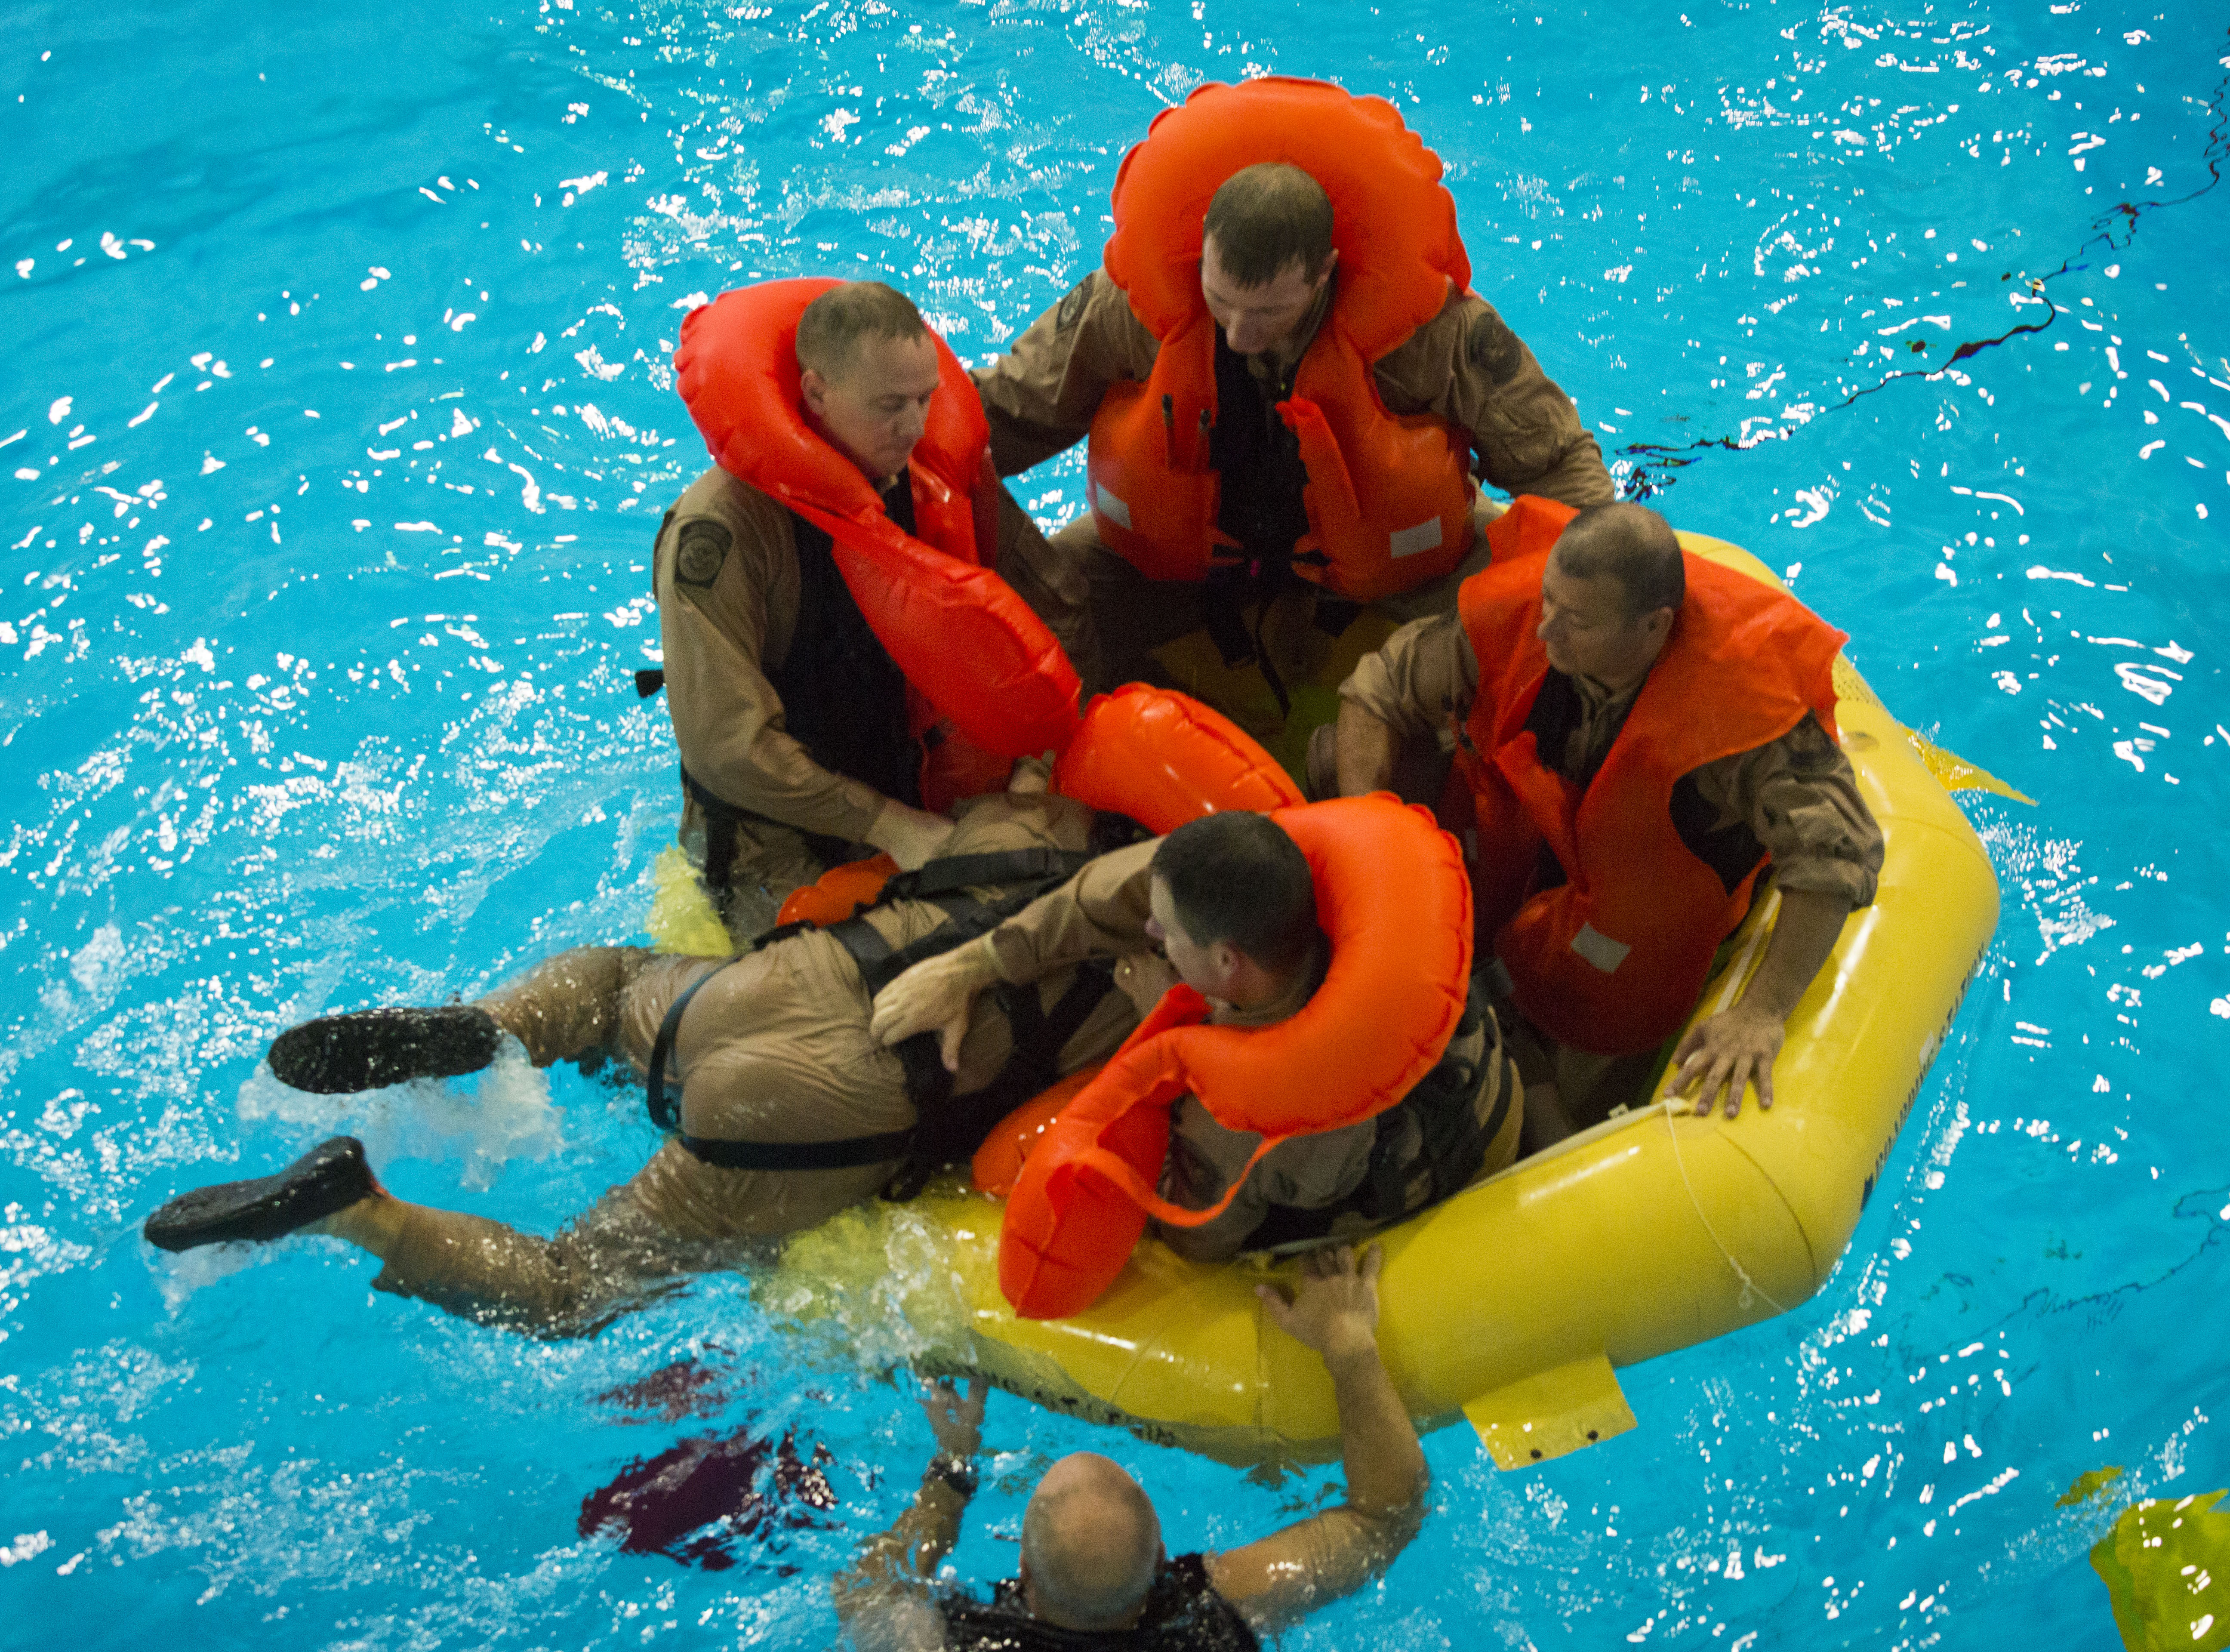 Water survival training gives agents an opportunity to practice boarding a raft.